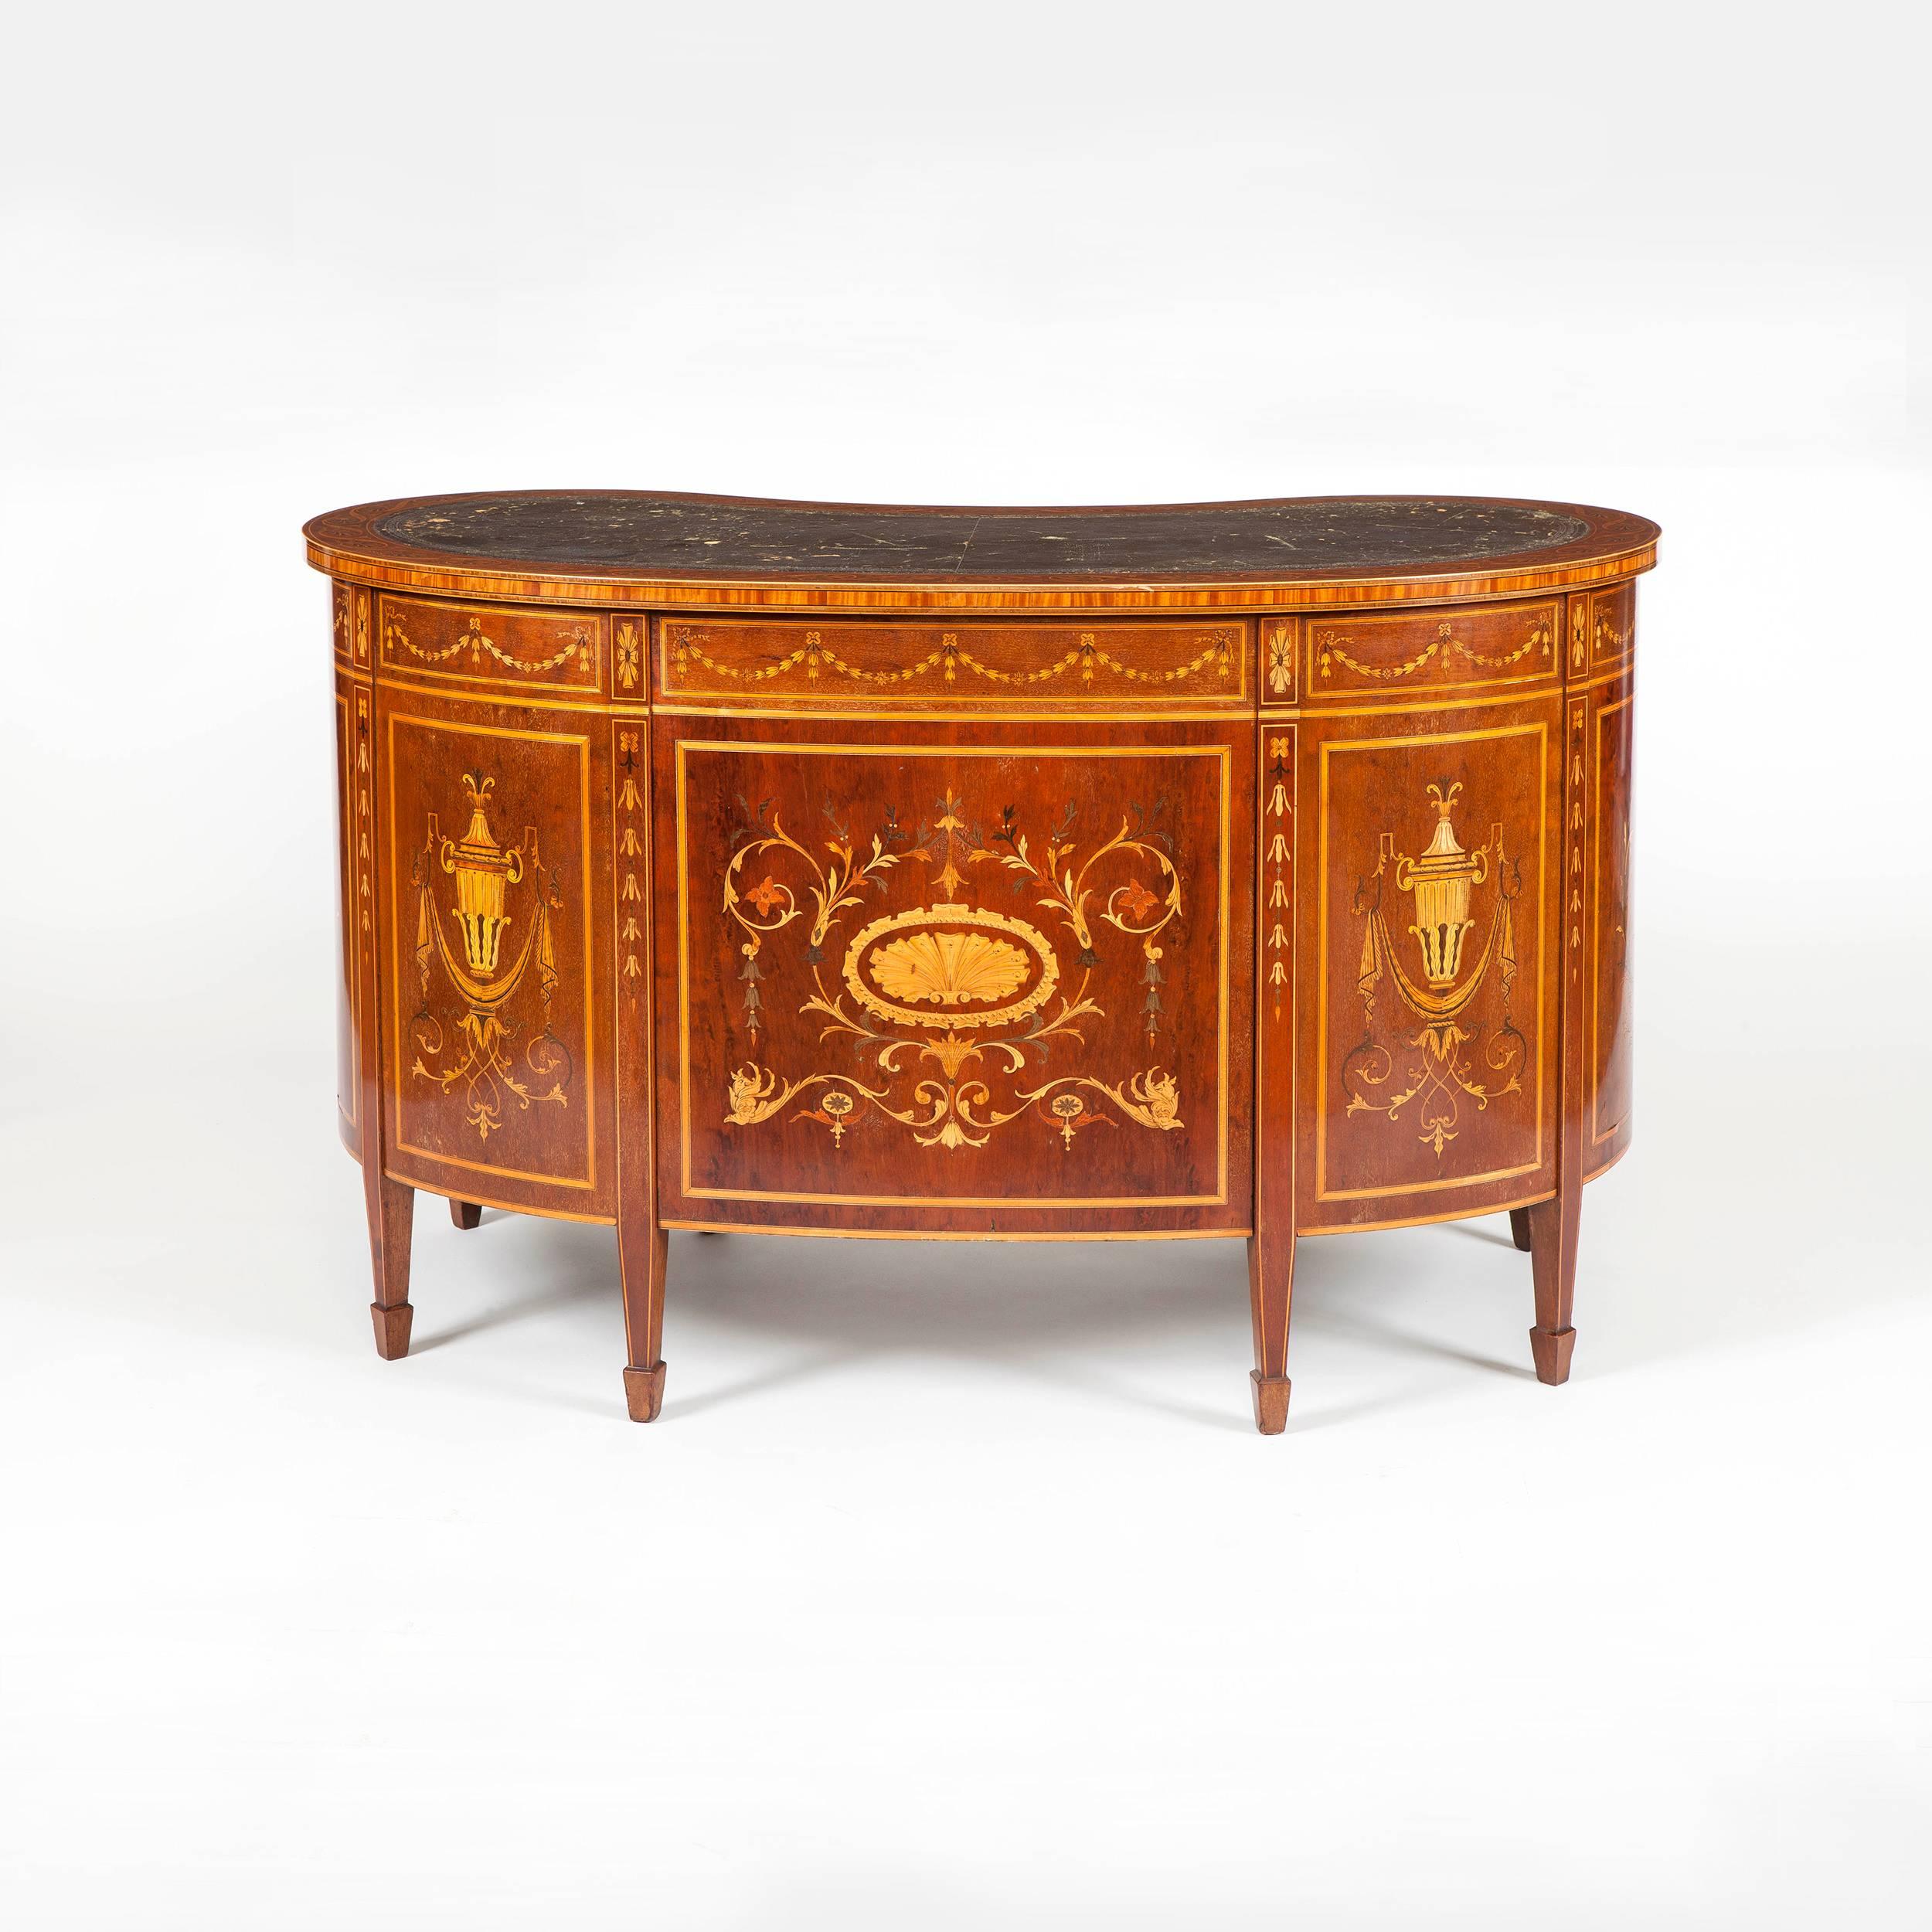 A kneehole library desk attributed to Edwards & Roberts.
Retailed by Druce & Co

Of kidney form constructed in a well patinated mahogany, extensively inlaid with specimen woods; rising from tapered spade end feet, of nine drawer form, all oak